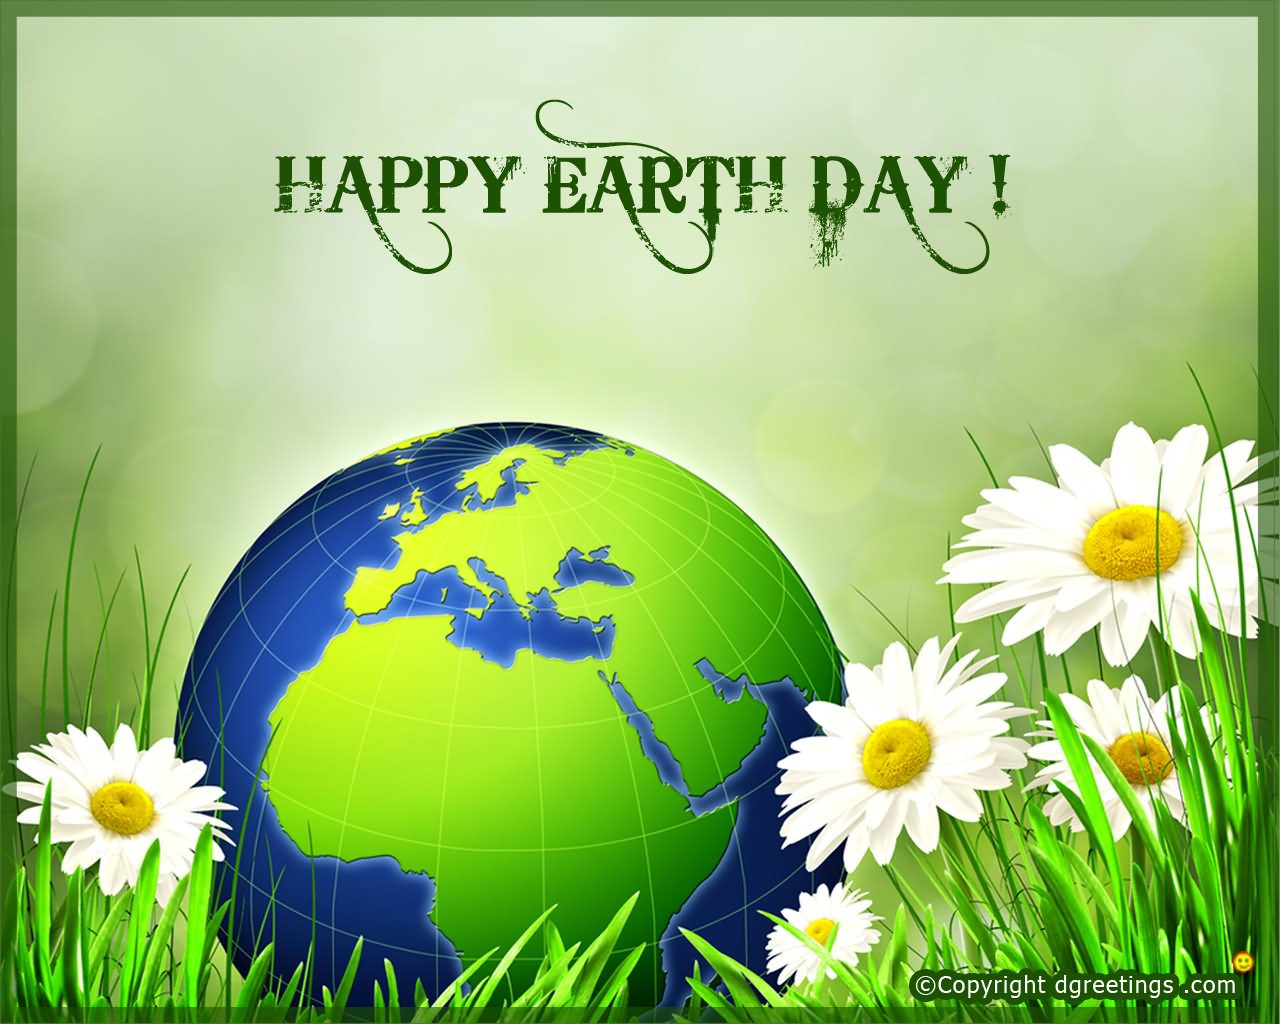 Happy Earth Day Greetings Wallpaper